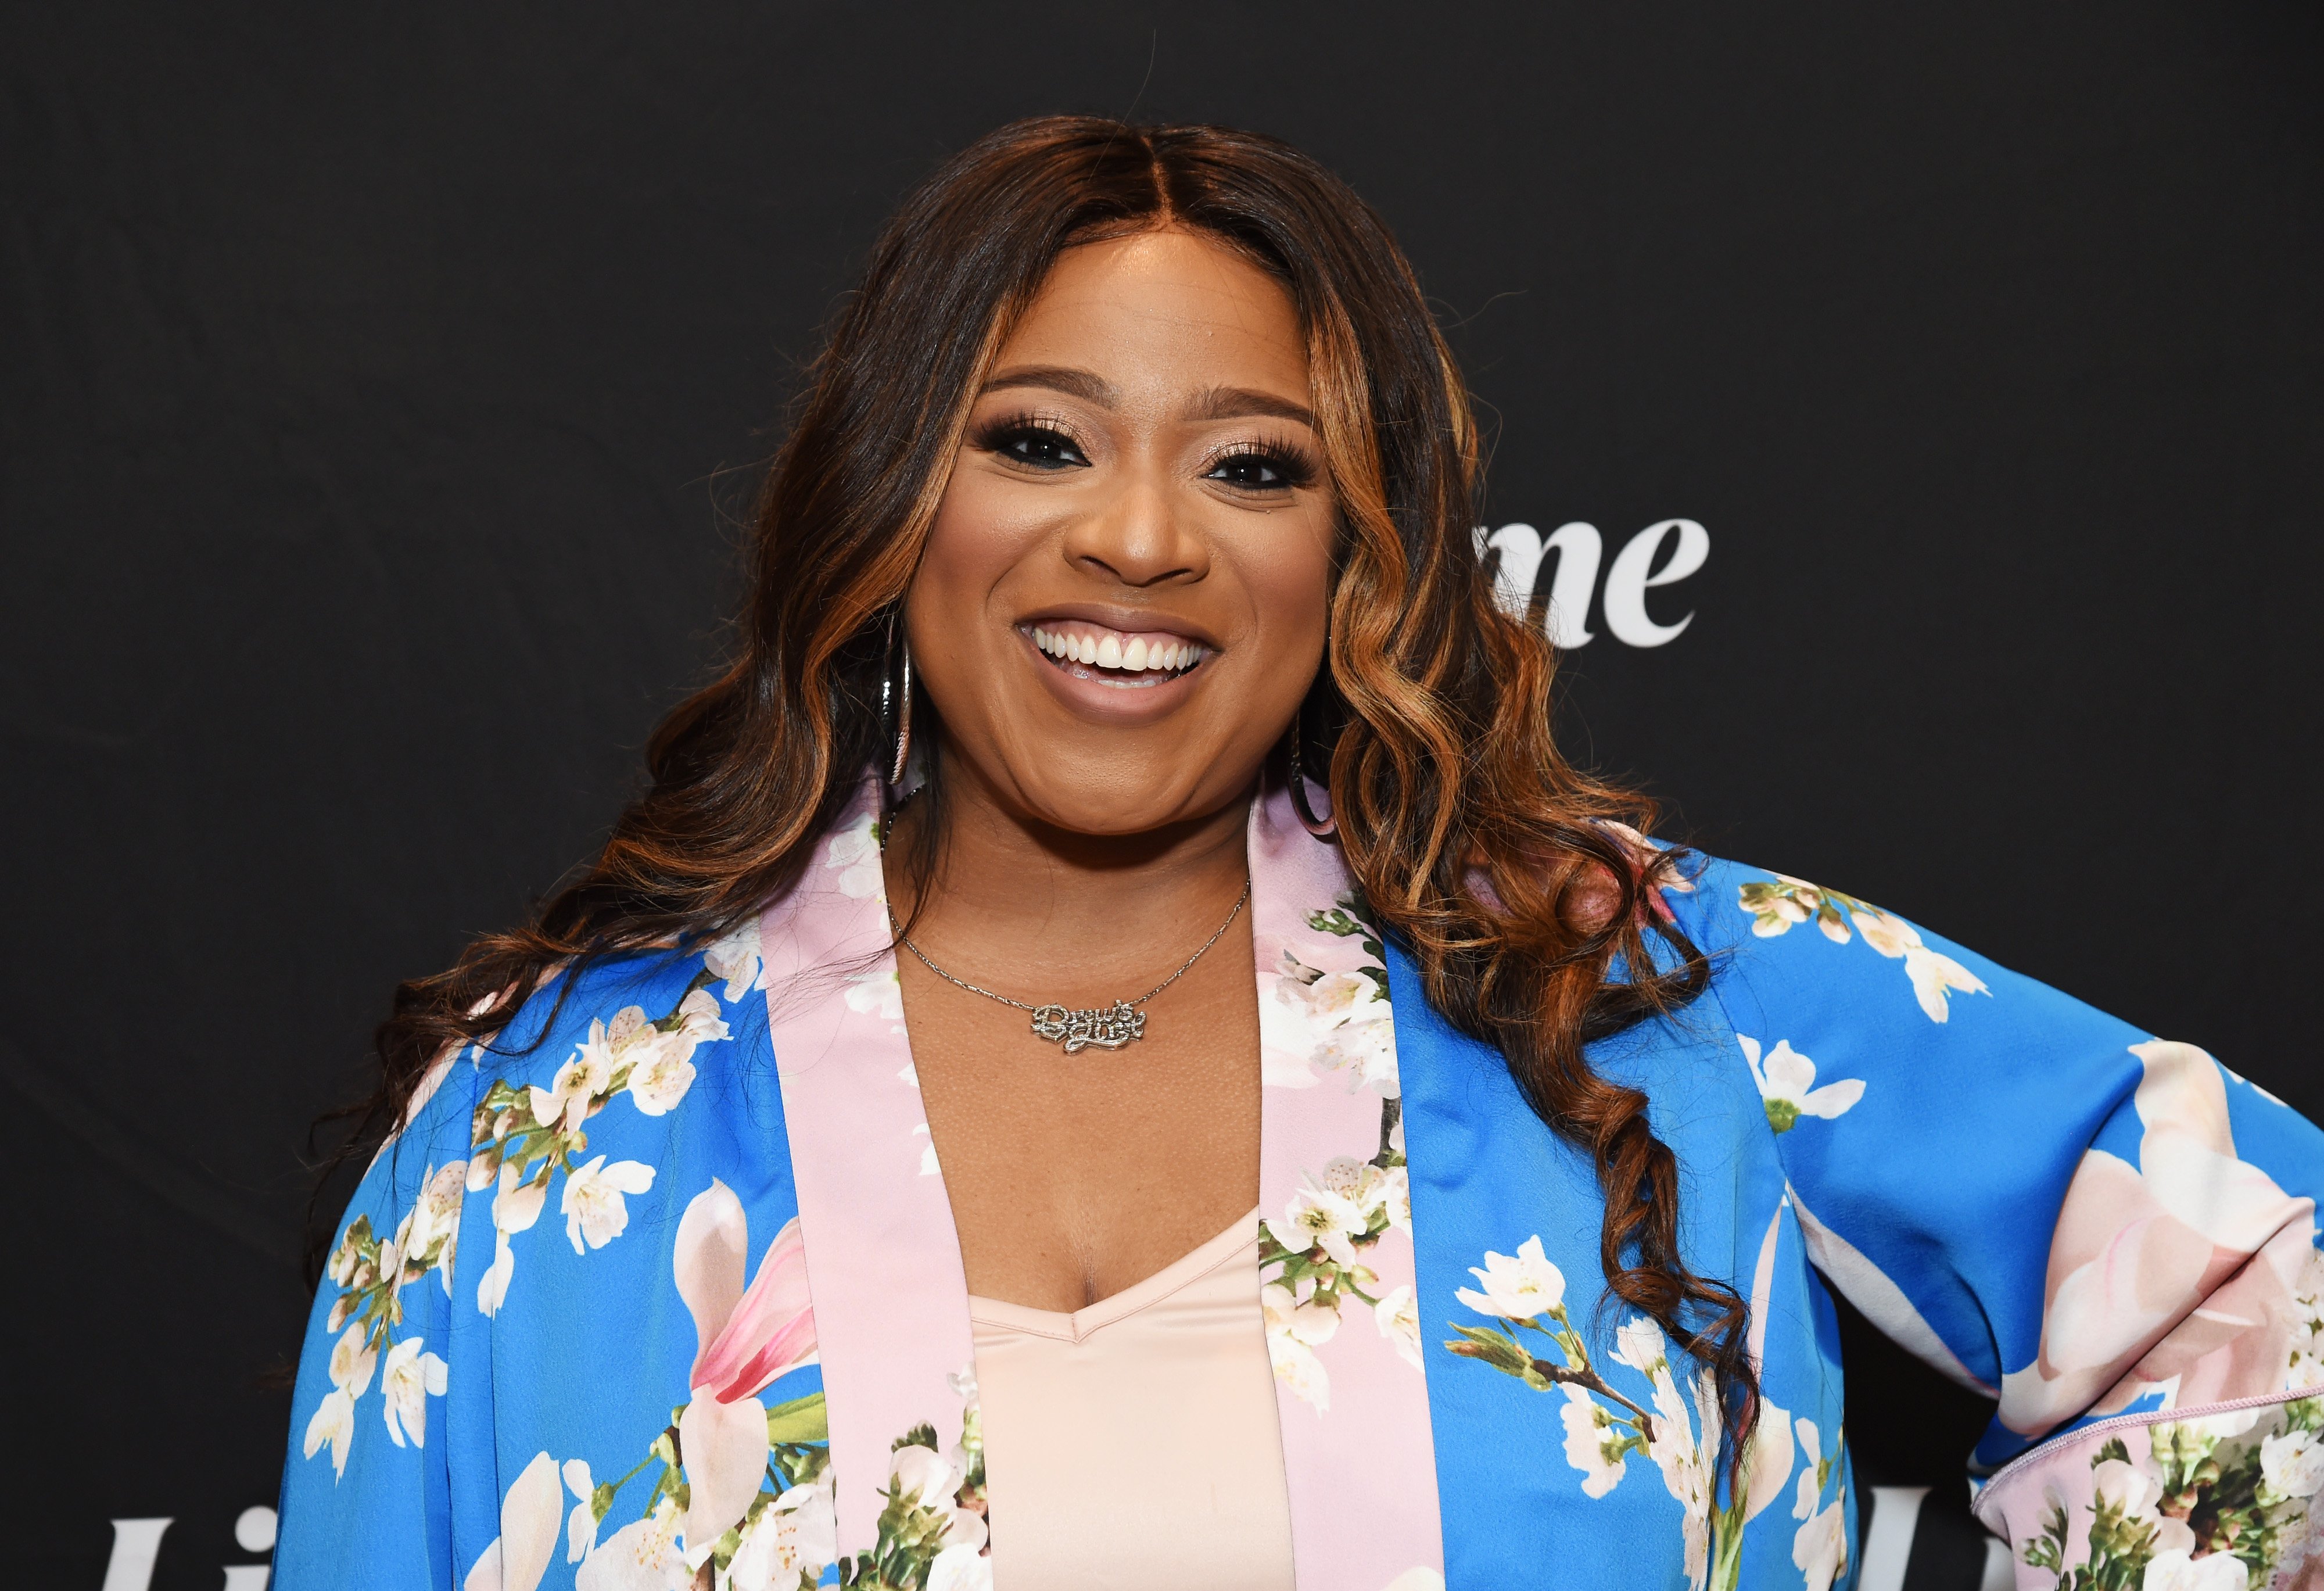 Kierra Sheard attends Lifetime's TCA Panels on January 18, 2020, in Pasadena, California. | Source: Getty Images.